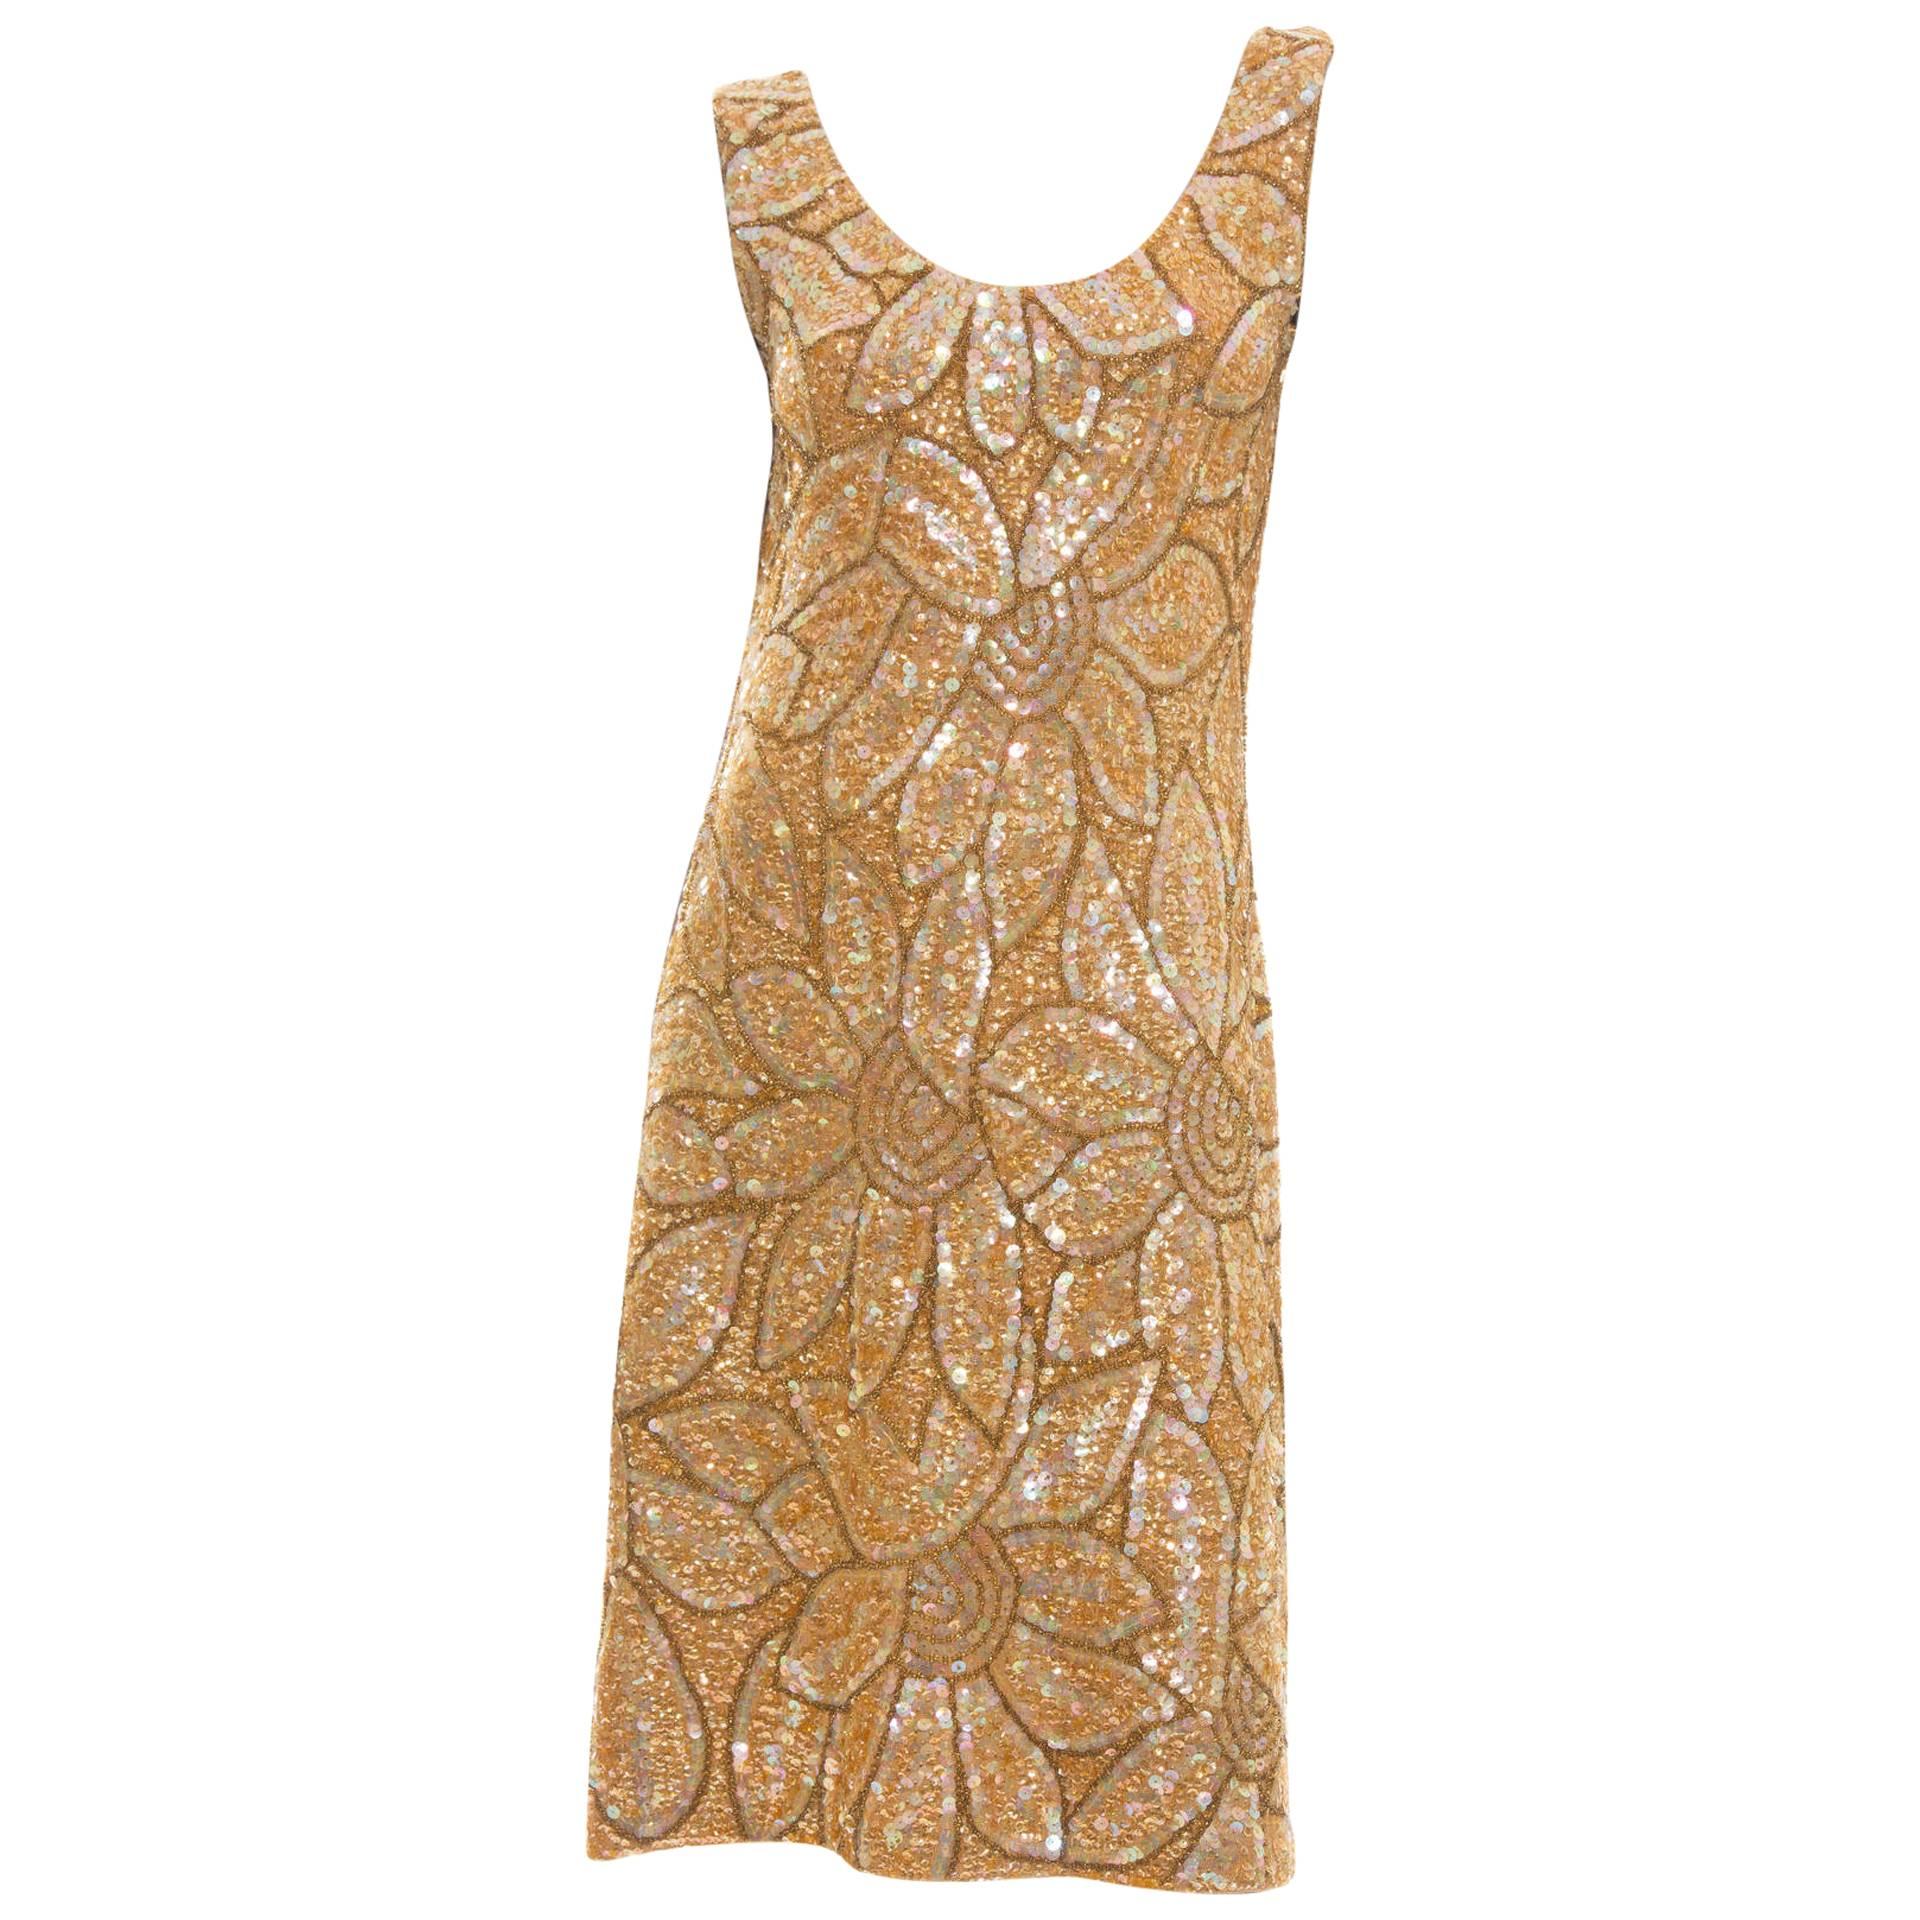 Gene Shelly's Boutique International Knit Sequined Dress And Top, Circa 1960 For Sale